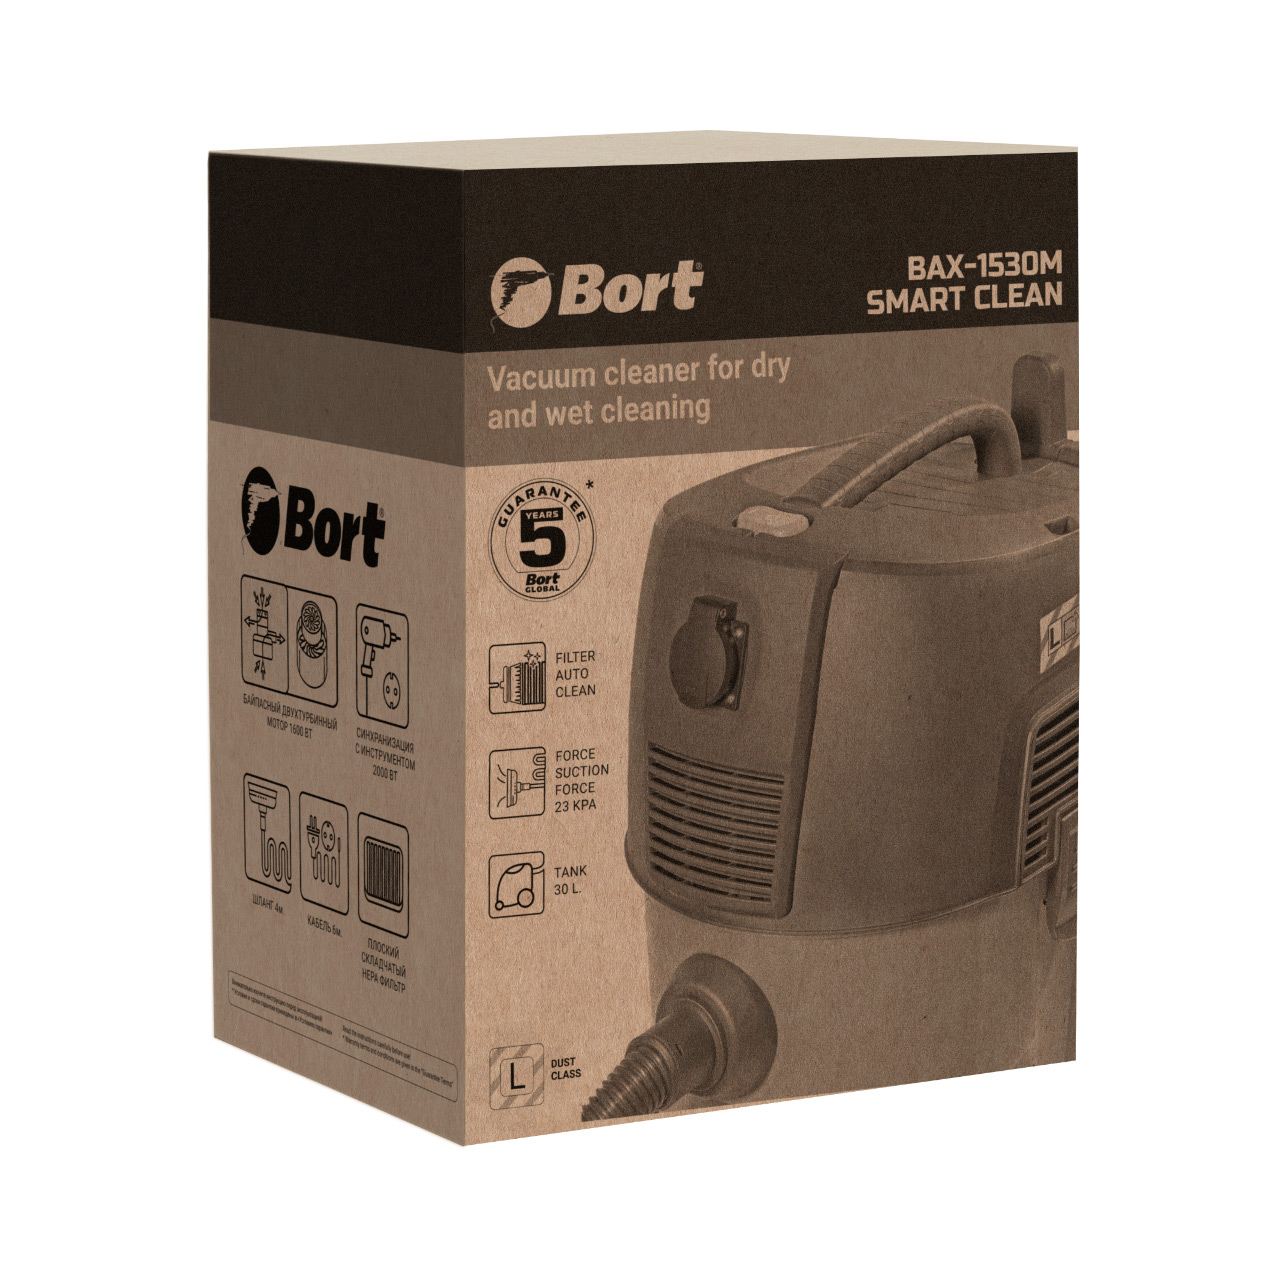 Vacuum cleaner for dry and wet cleaning BORT BAX-1530M-Smart Clean